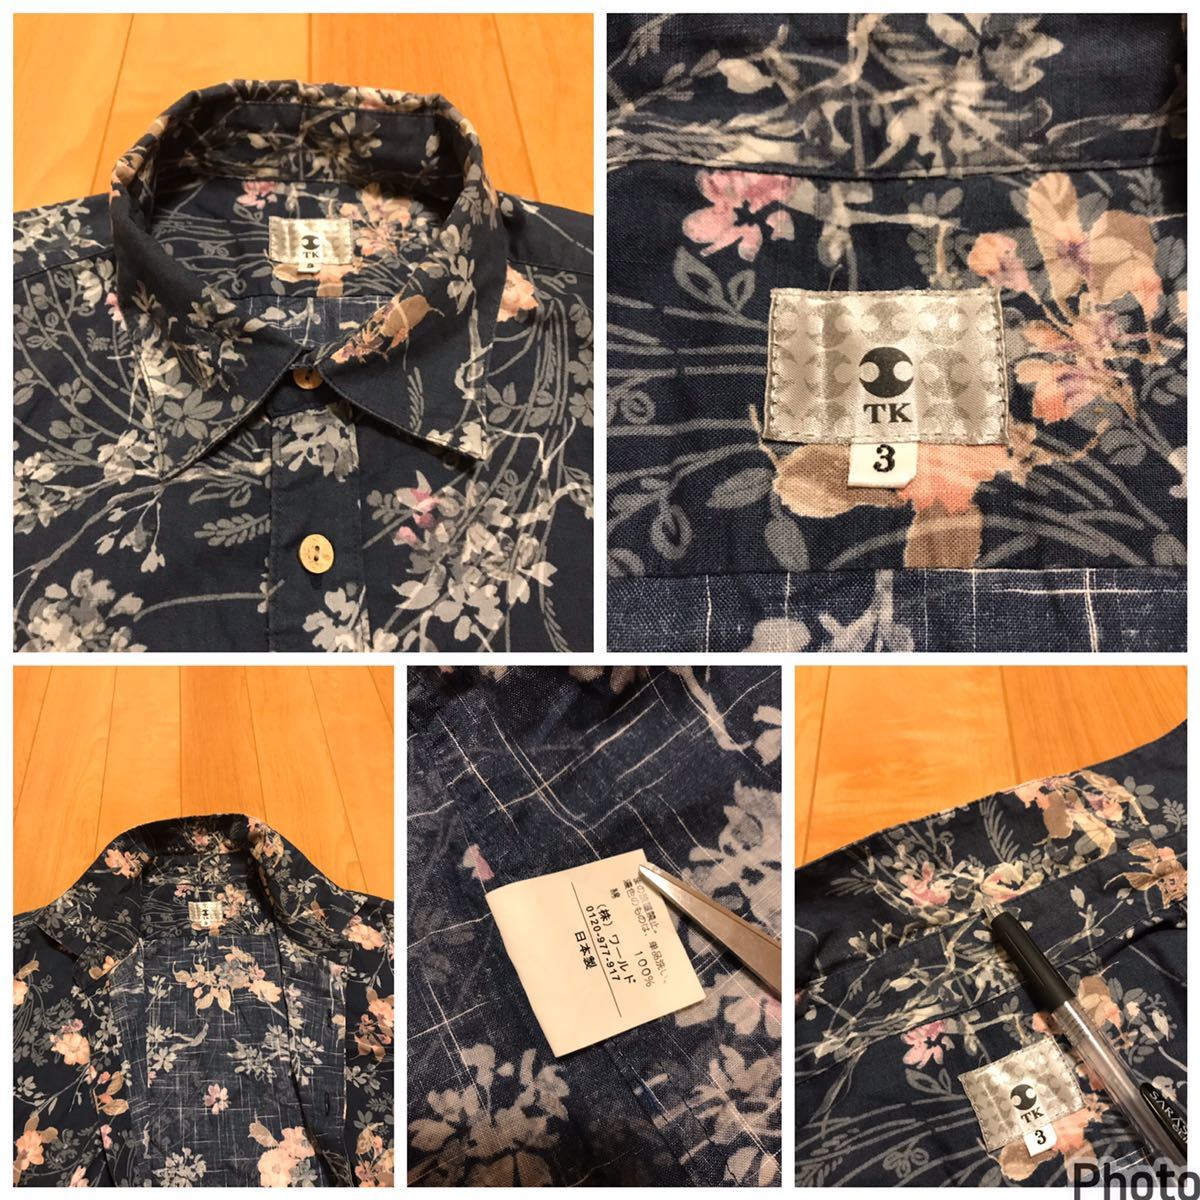  superior article *TK/ Takeo Kikuchi men's size 3 peace pattern * short sleeves aro is manner shirt old manner .. flower total pattern print indigo style navy navy blue color coconut button!